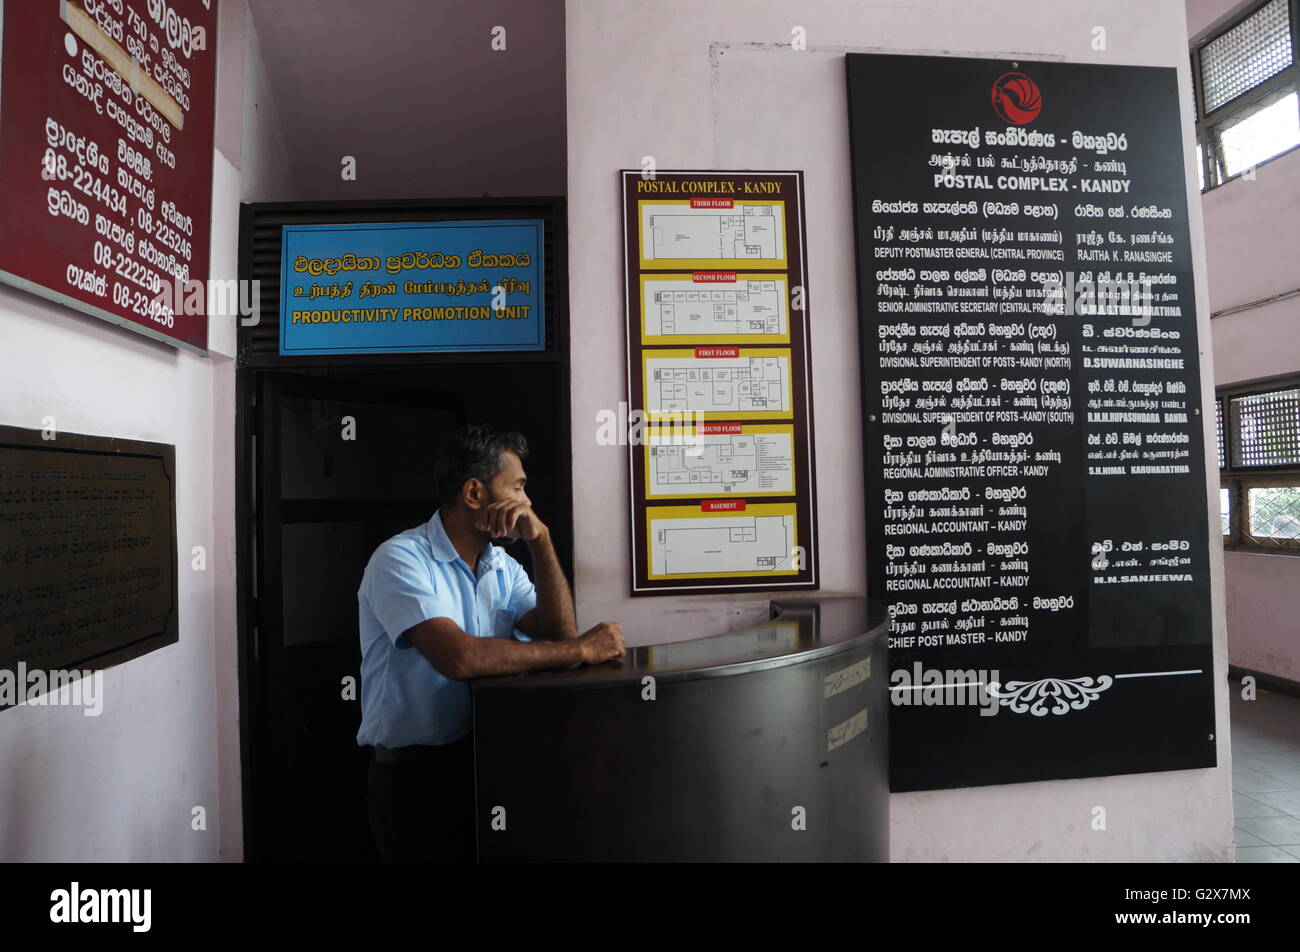 A staff is standing in front of the sign 'Productivity Promotion Unit' at the entrance of Kandy Postal Office, Sri Lanka Stock Photo